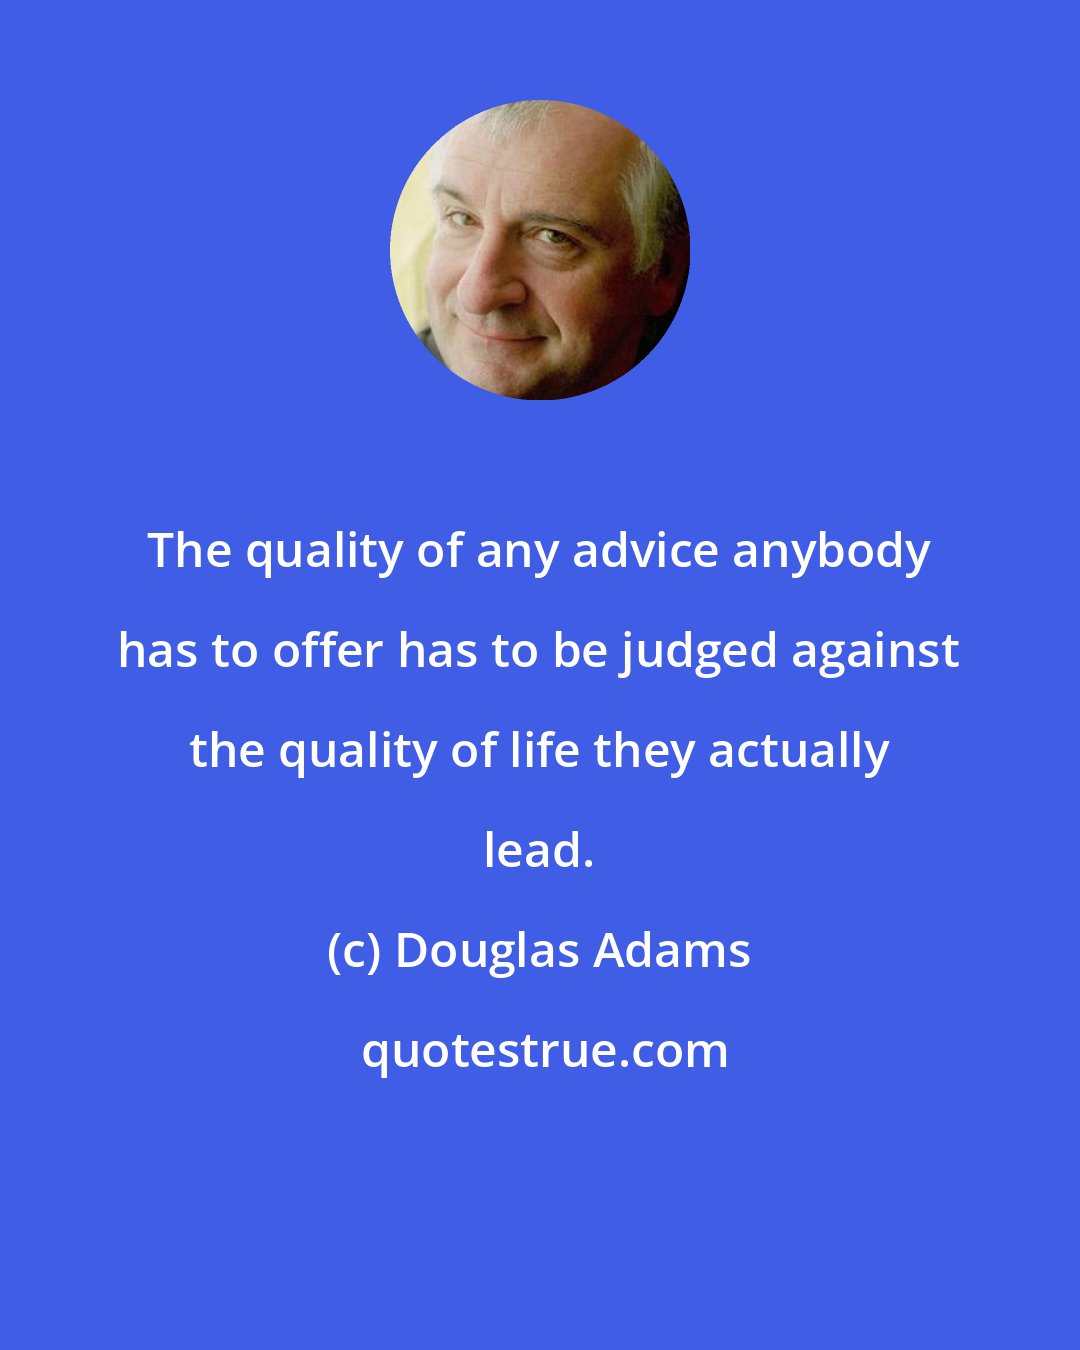 Douglas Adams: The quality of any advice anybody has to offer has to be judged against the quality of life they actually lead.